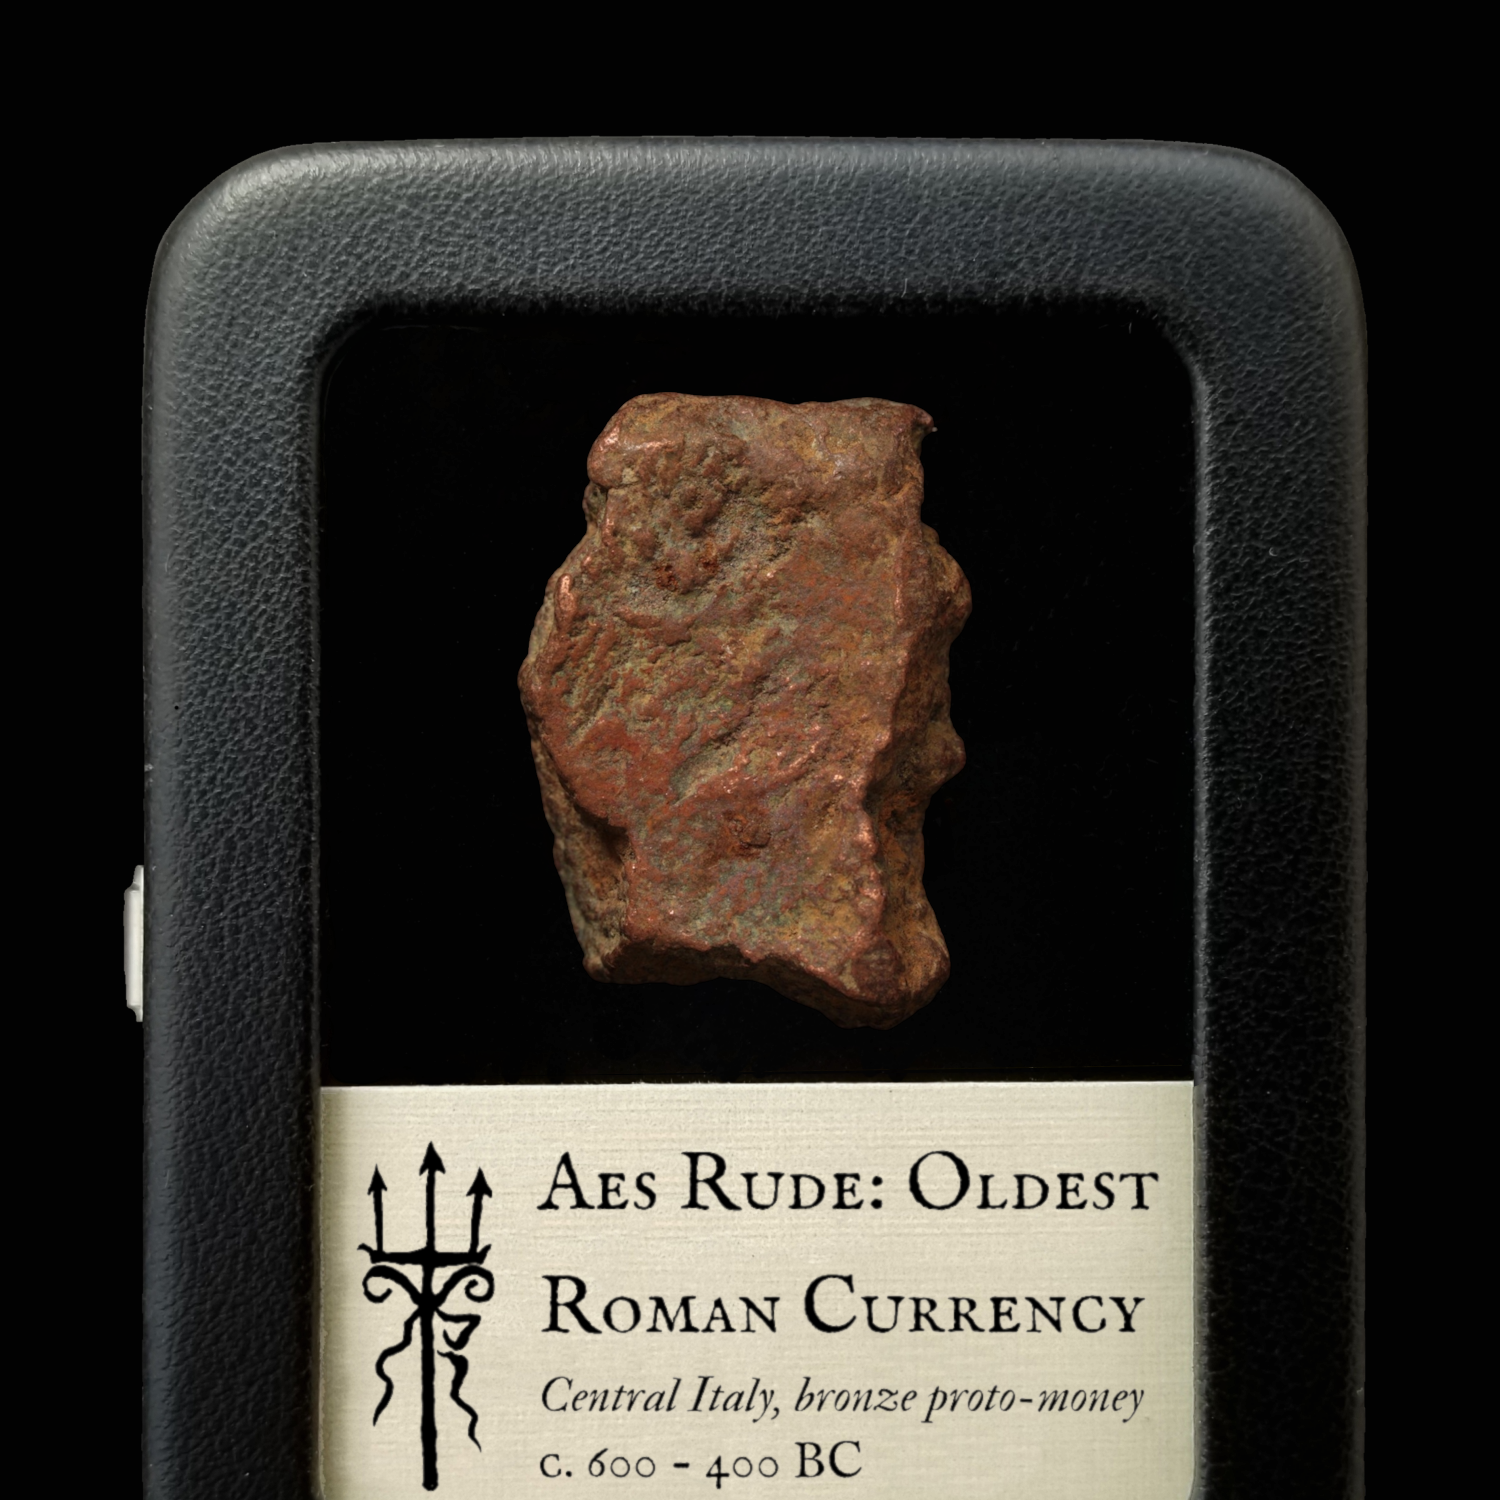 Aes Rude, First Roman Currency - c. 600 to 400 BCE - Ancient Italy